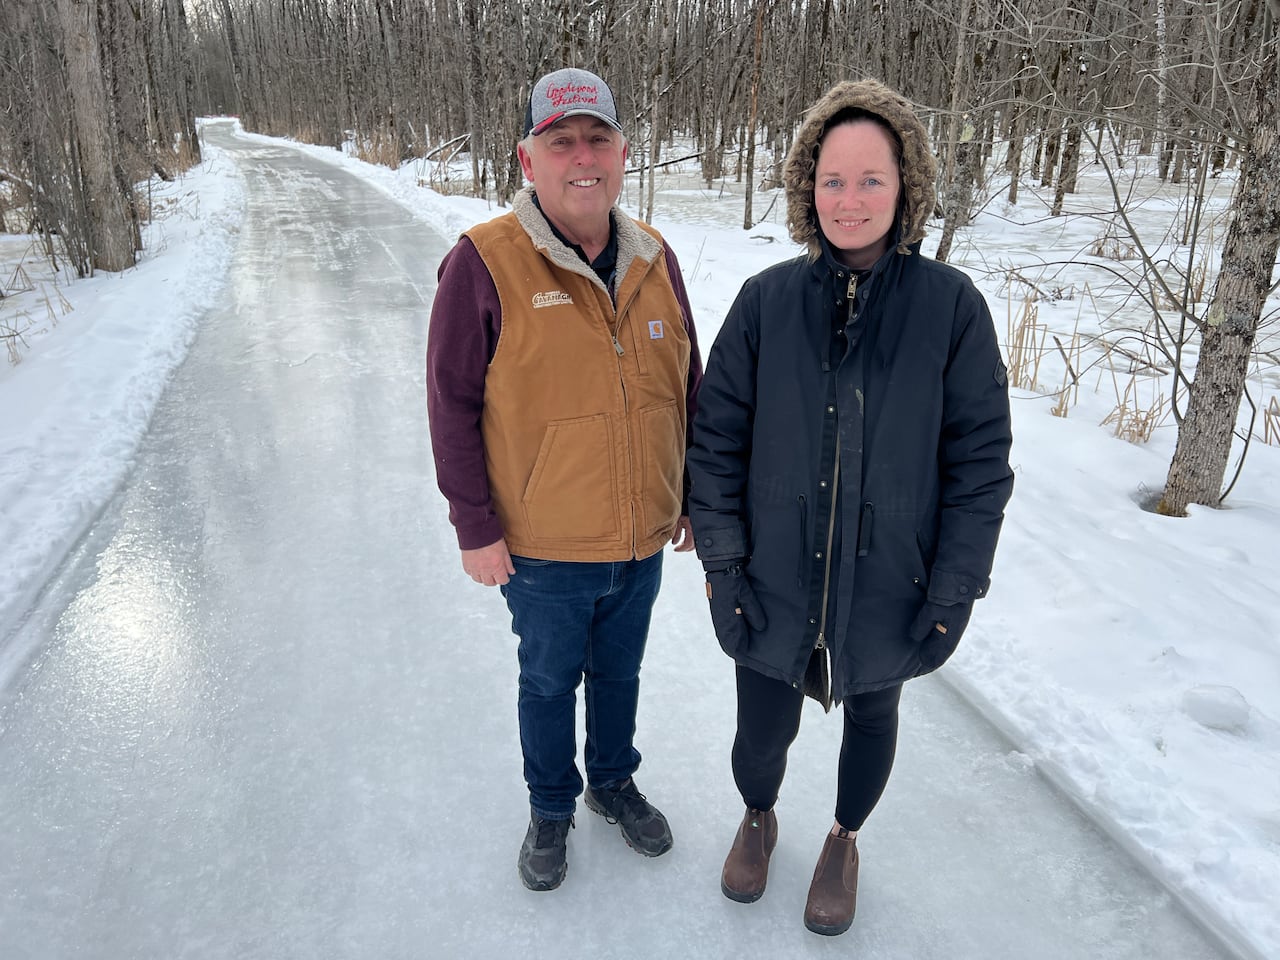 new skating loop in beckwith township now open